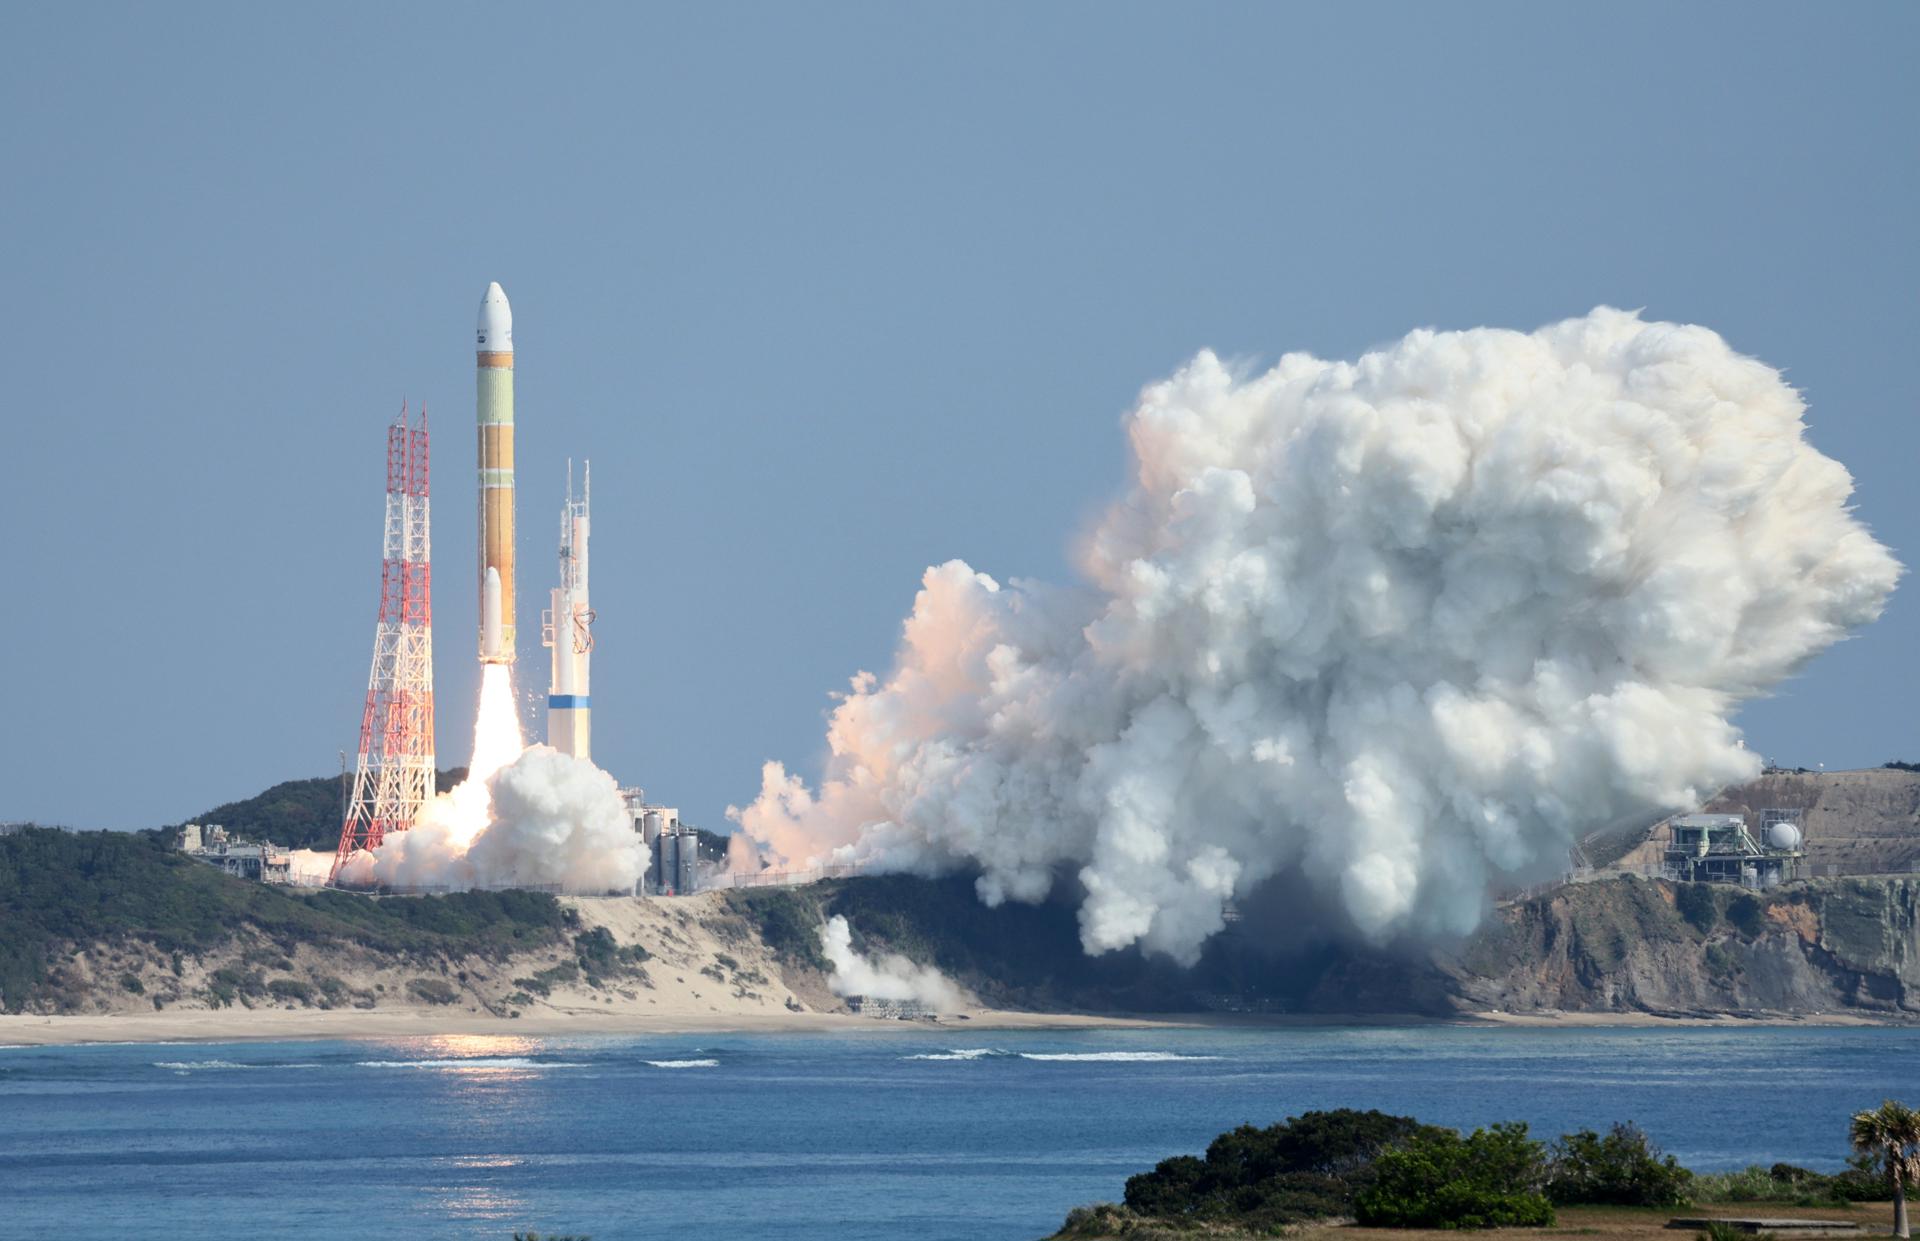 Japan's new H3 rocket carrying land observing Satellite-3 'DAICHI-3' launches from a pad at the Tanegashima Space Center located on Tanegashima island, Kagoshima Prefecture, Japan, 07 March 2023. The Japan Aerospace Exploration Agency (JAXA) announced it ordered the rocket to self-destruct minutes after its lauch following an apparent second-stage engine ignition failure. EFE-EPA/JIJI PRESS JAPAN OUT EDITORIAL USE ONLY